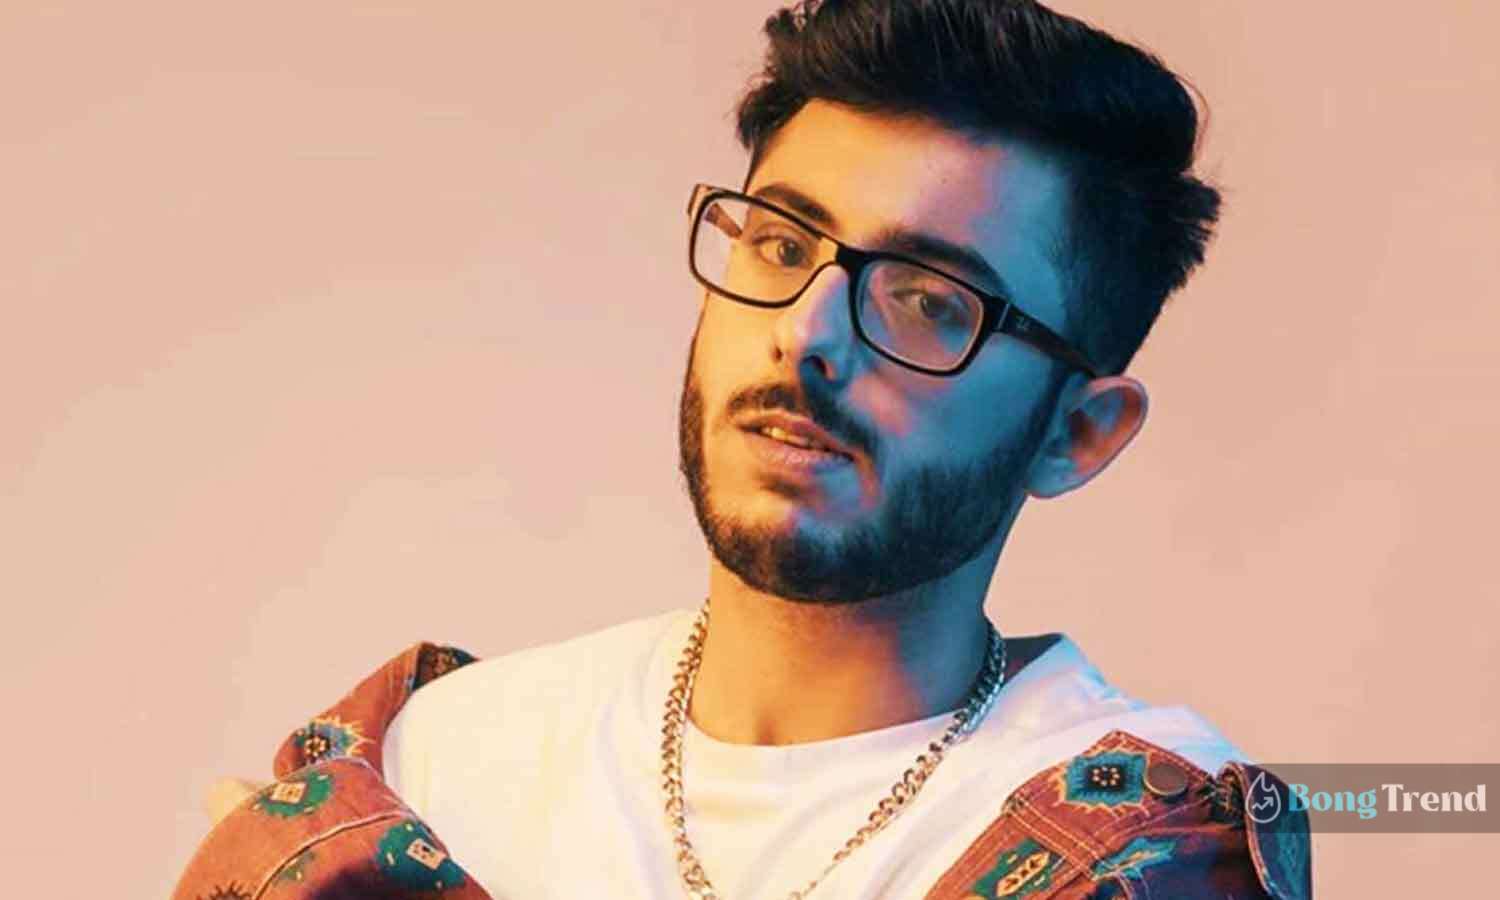 Case filed against youtube star carryminati for posting objectionable against women,Case filed against carryminati,carryminati,ajay nagar,delhi advocate files case against carryminati